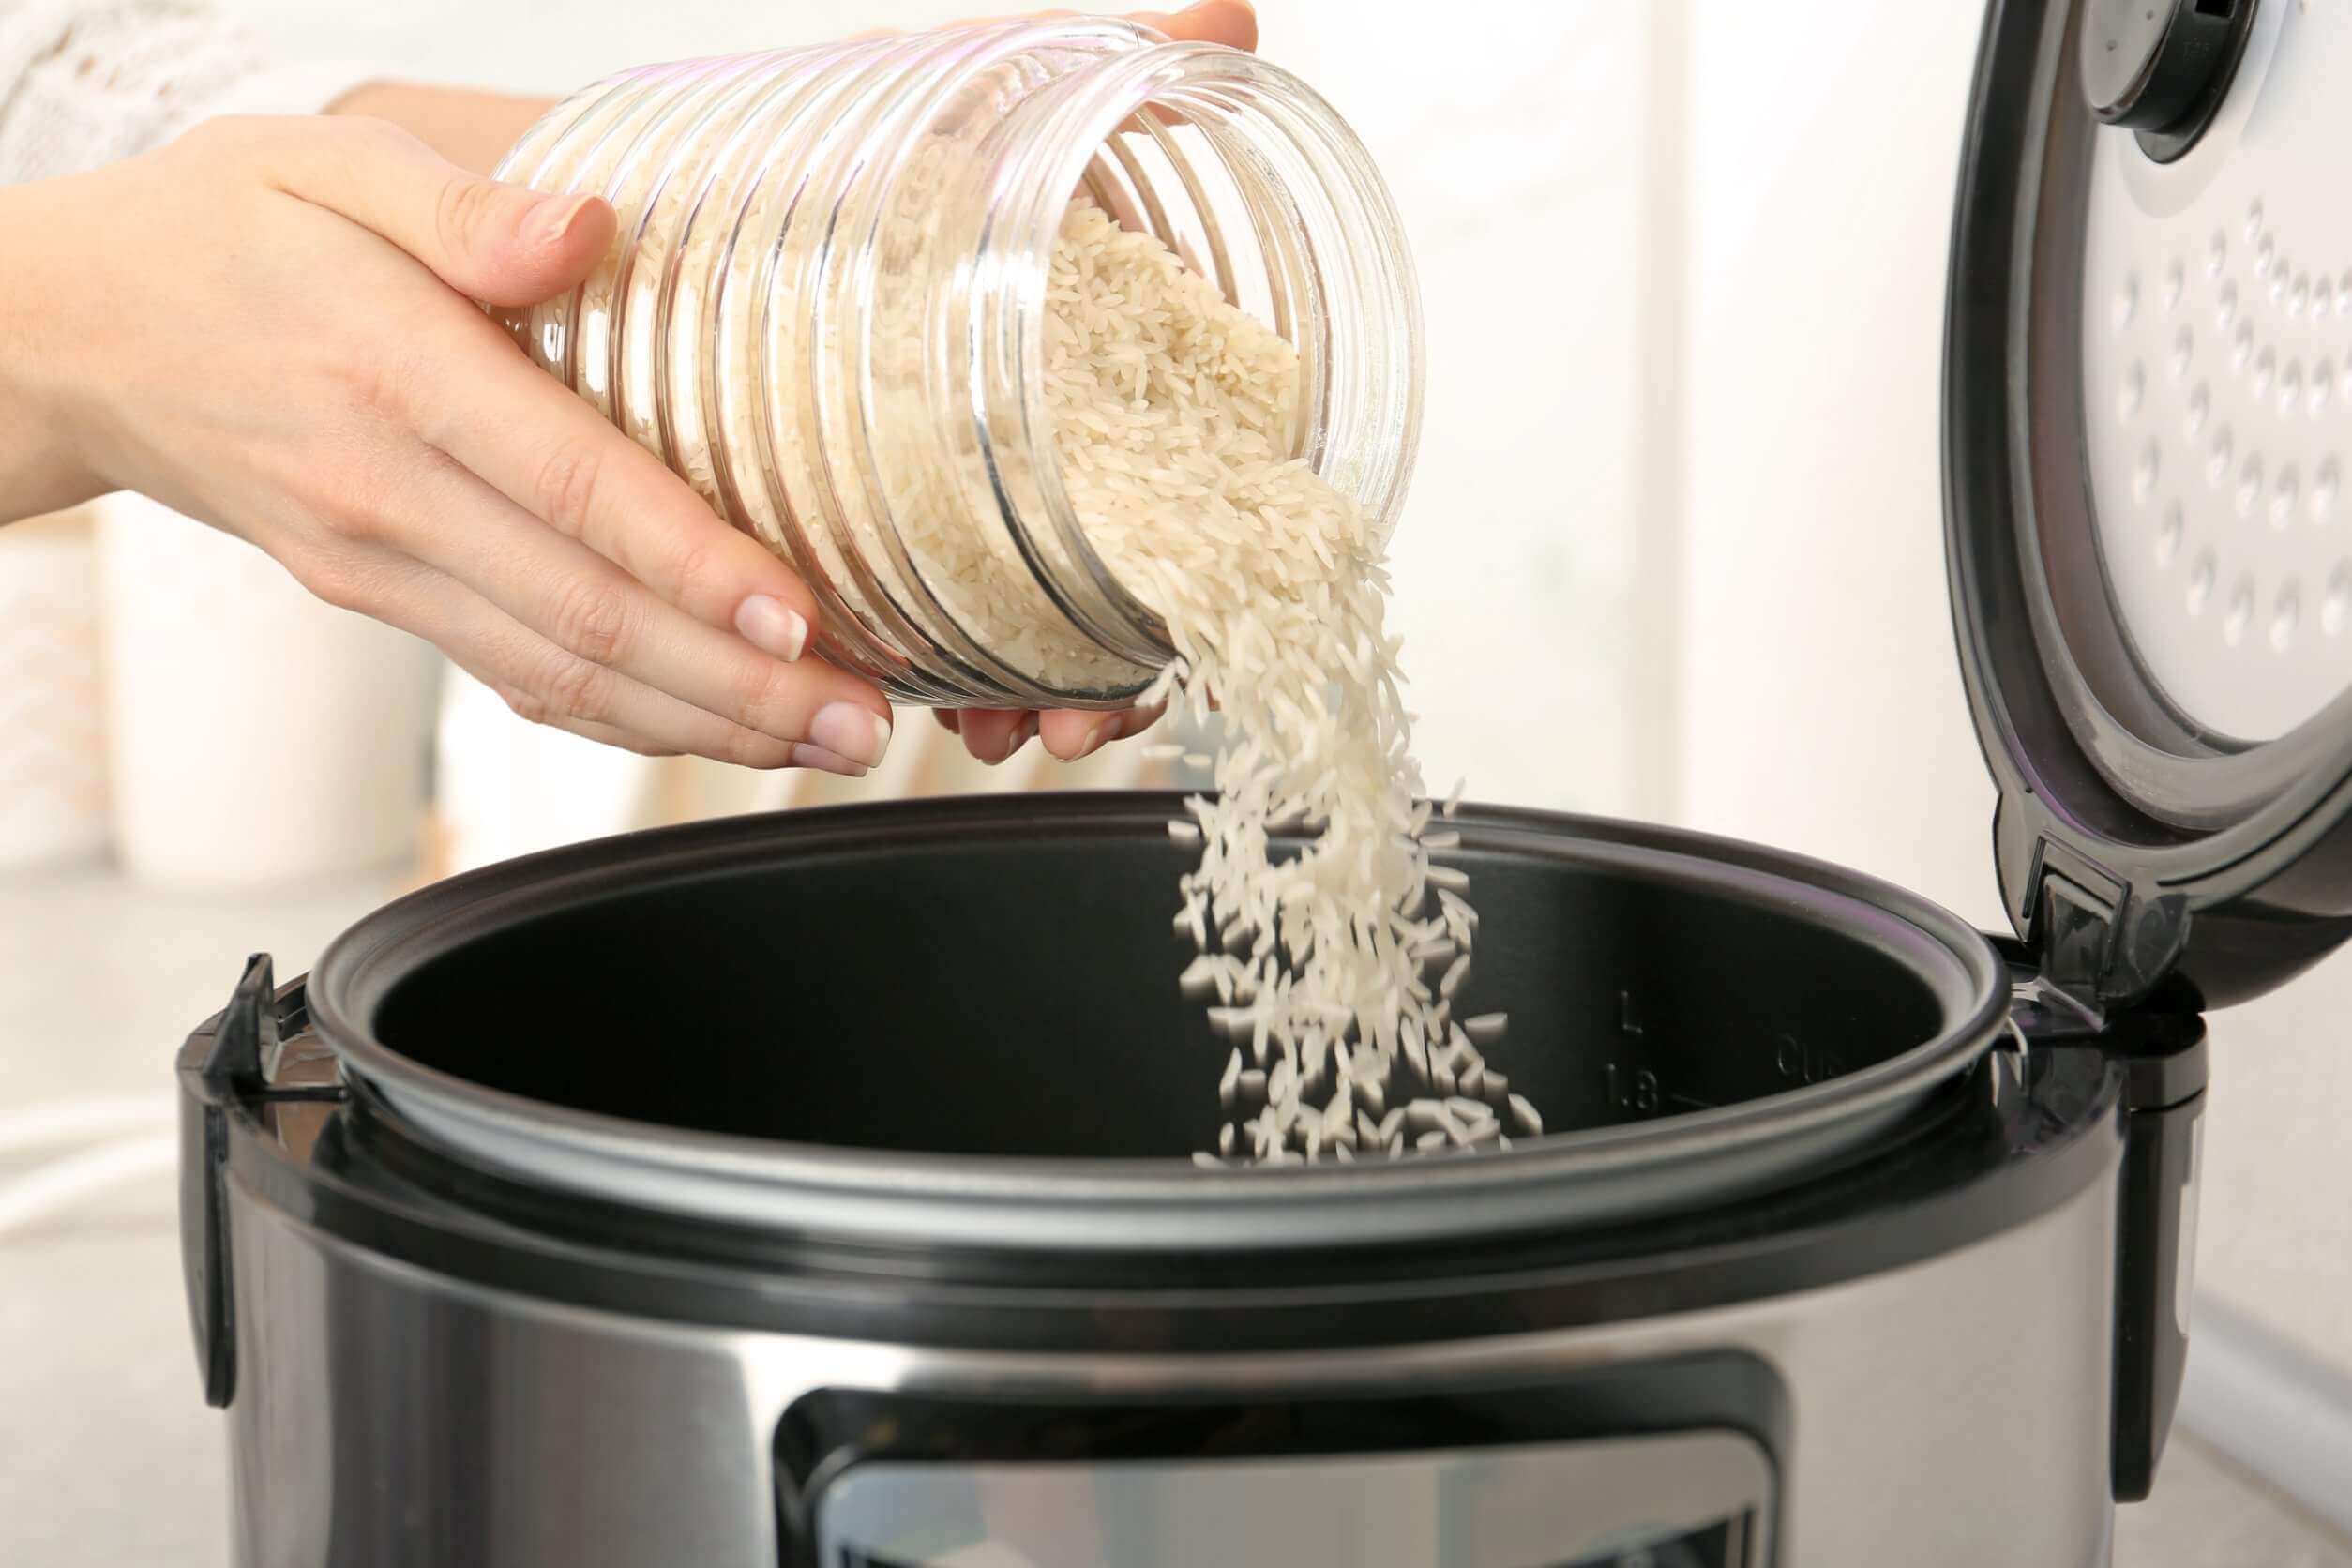 Pour Rice into Instapot for Cooking